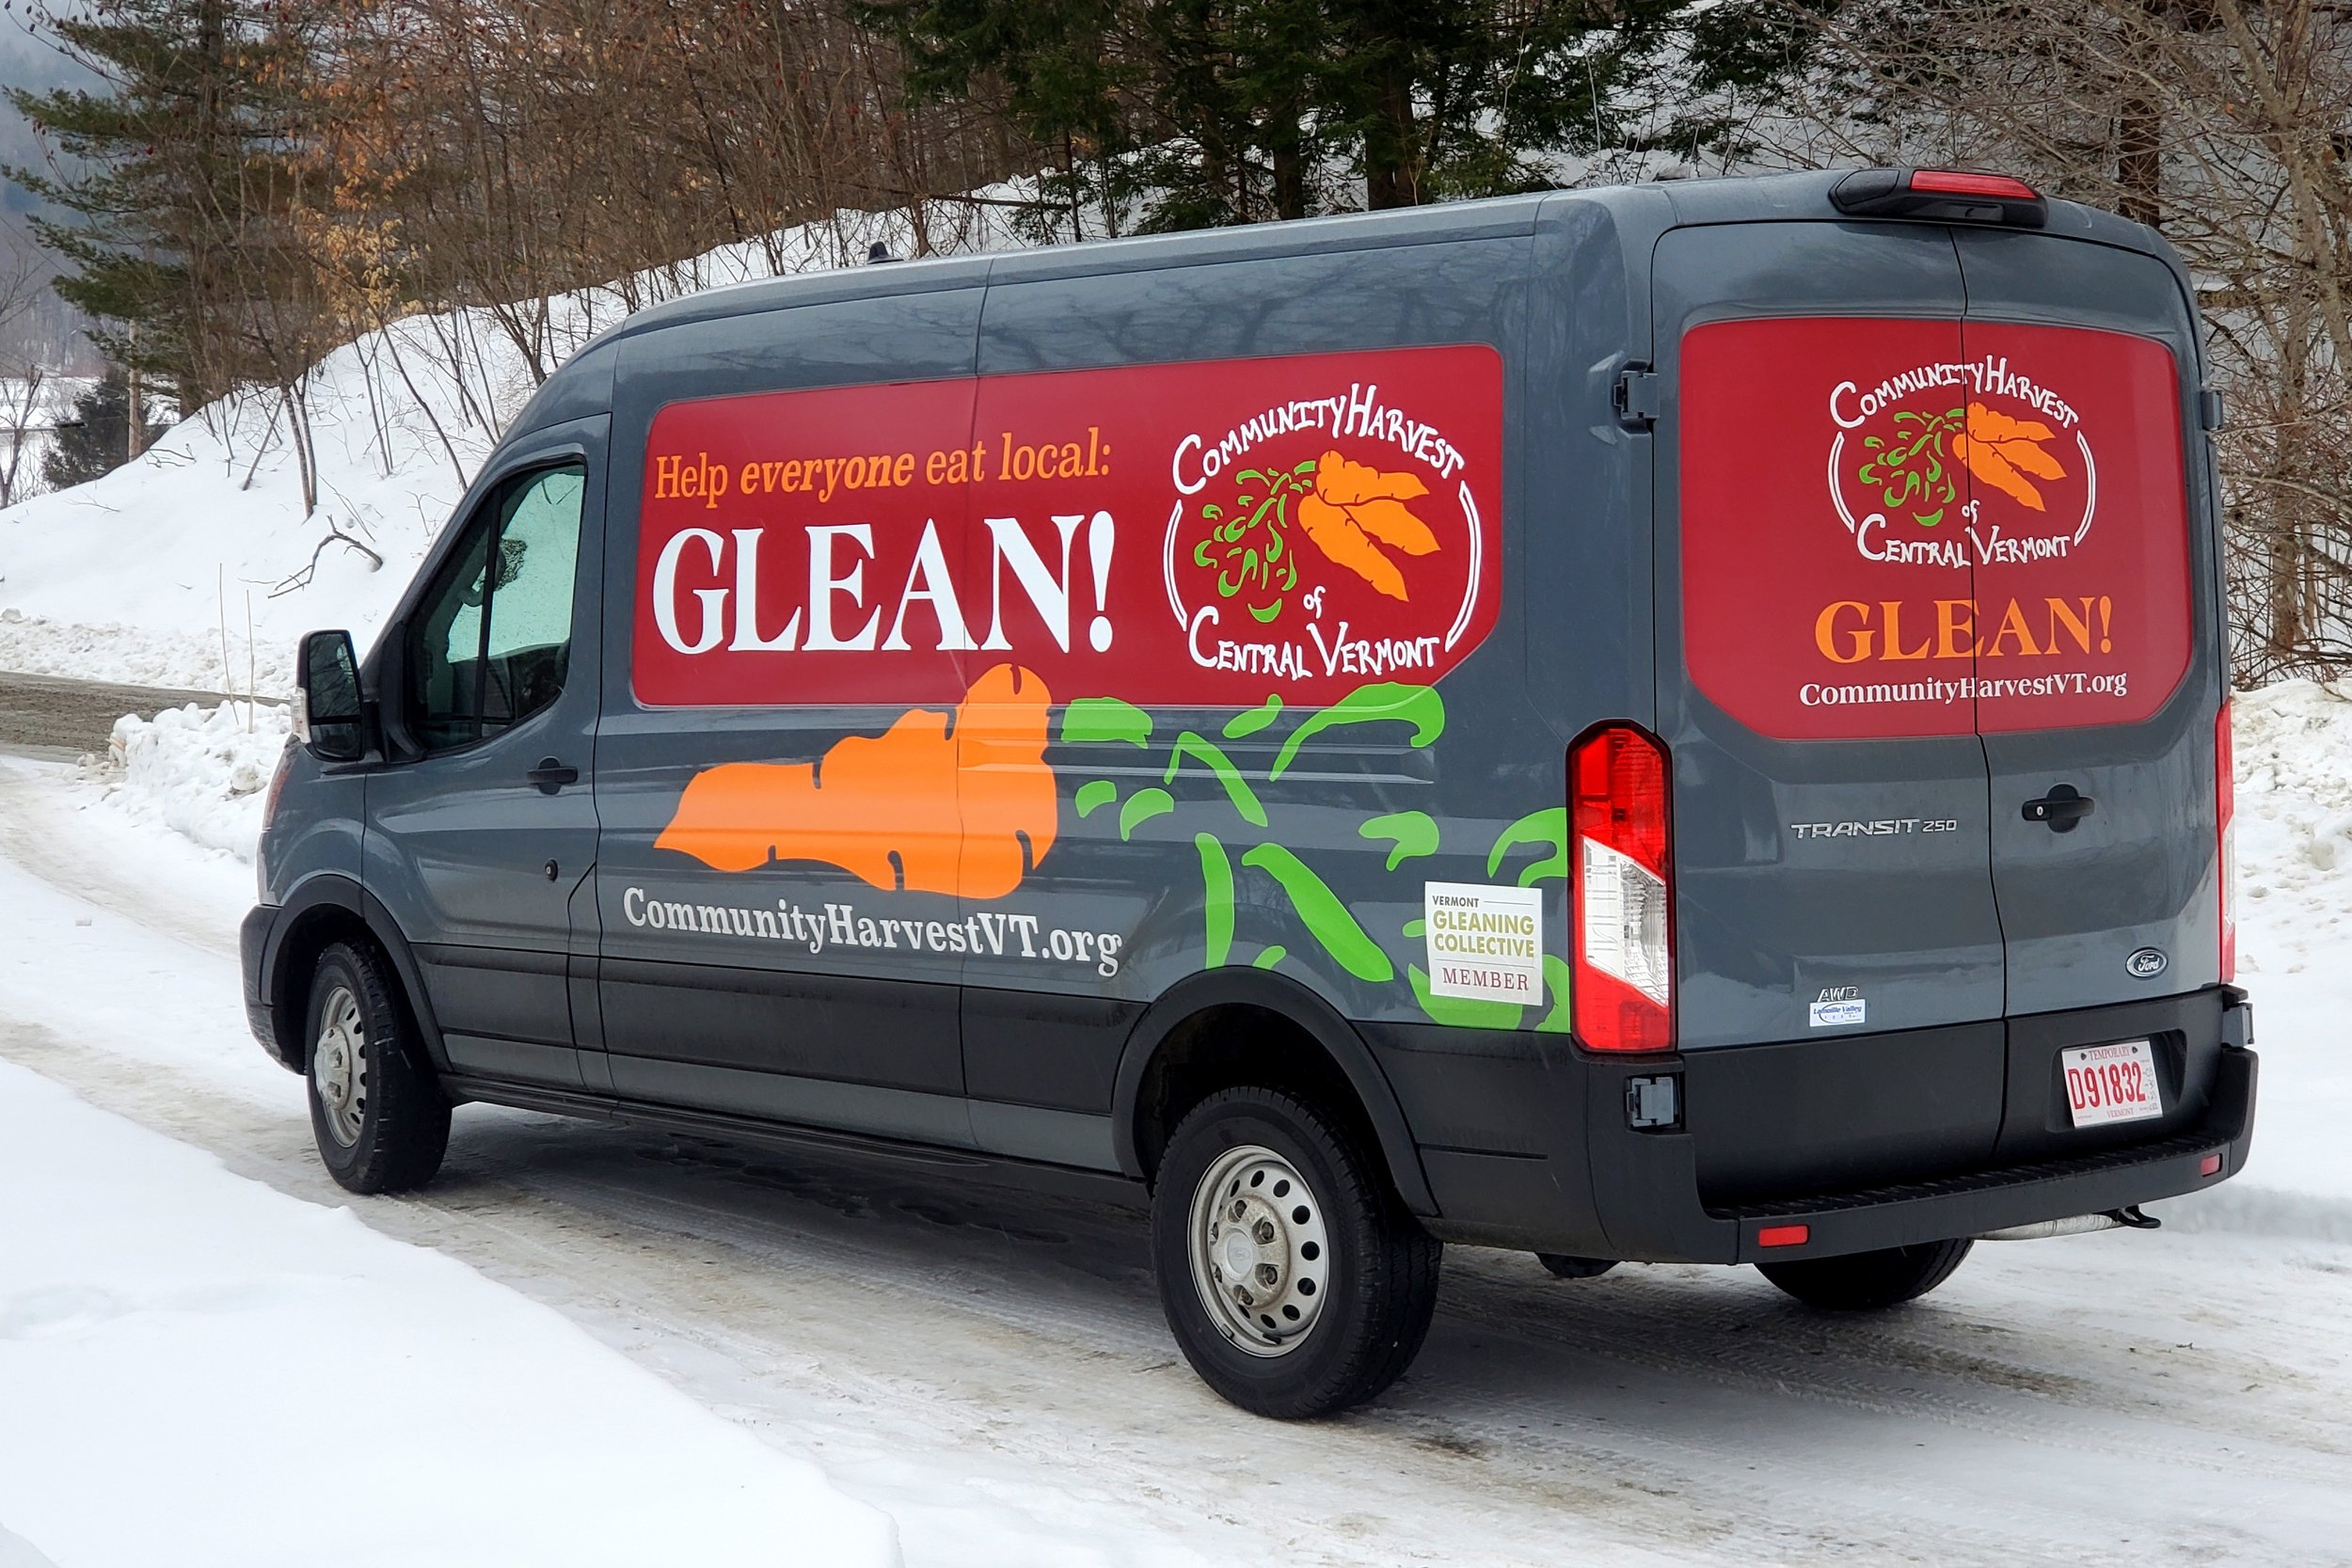 Our New Gleaning Van